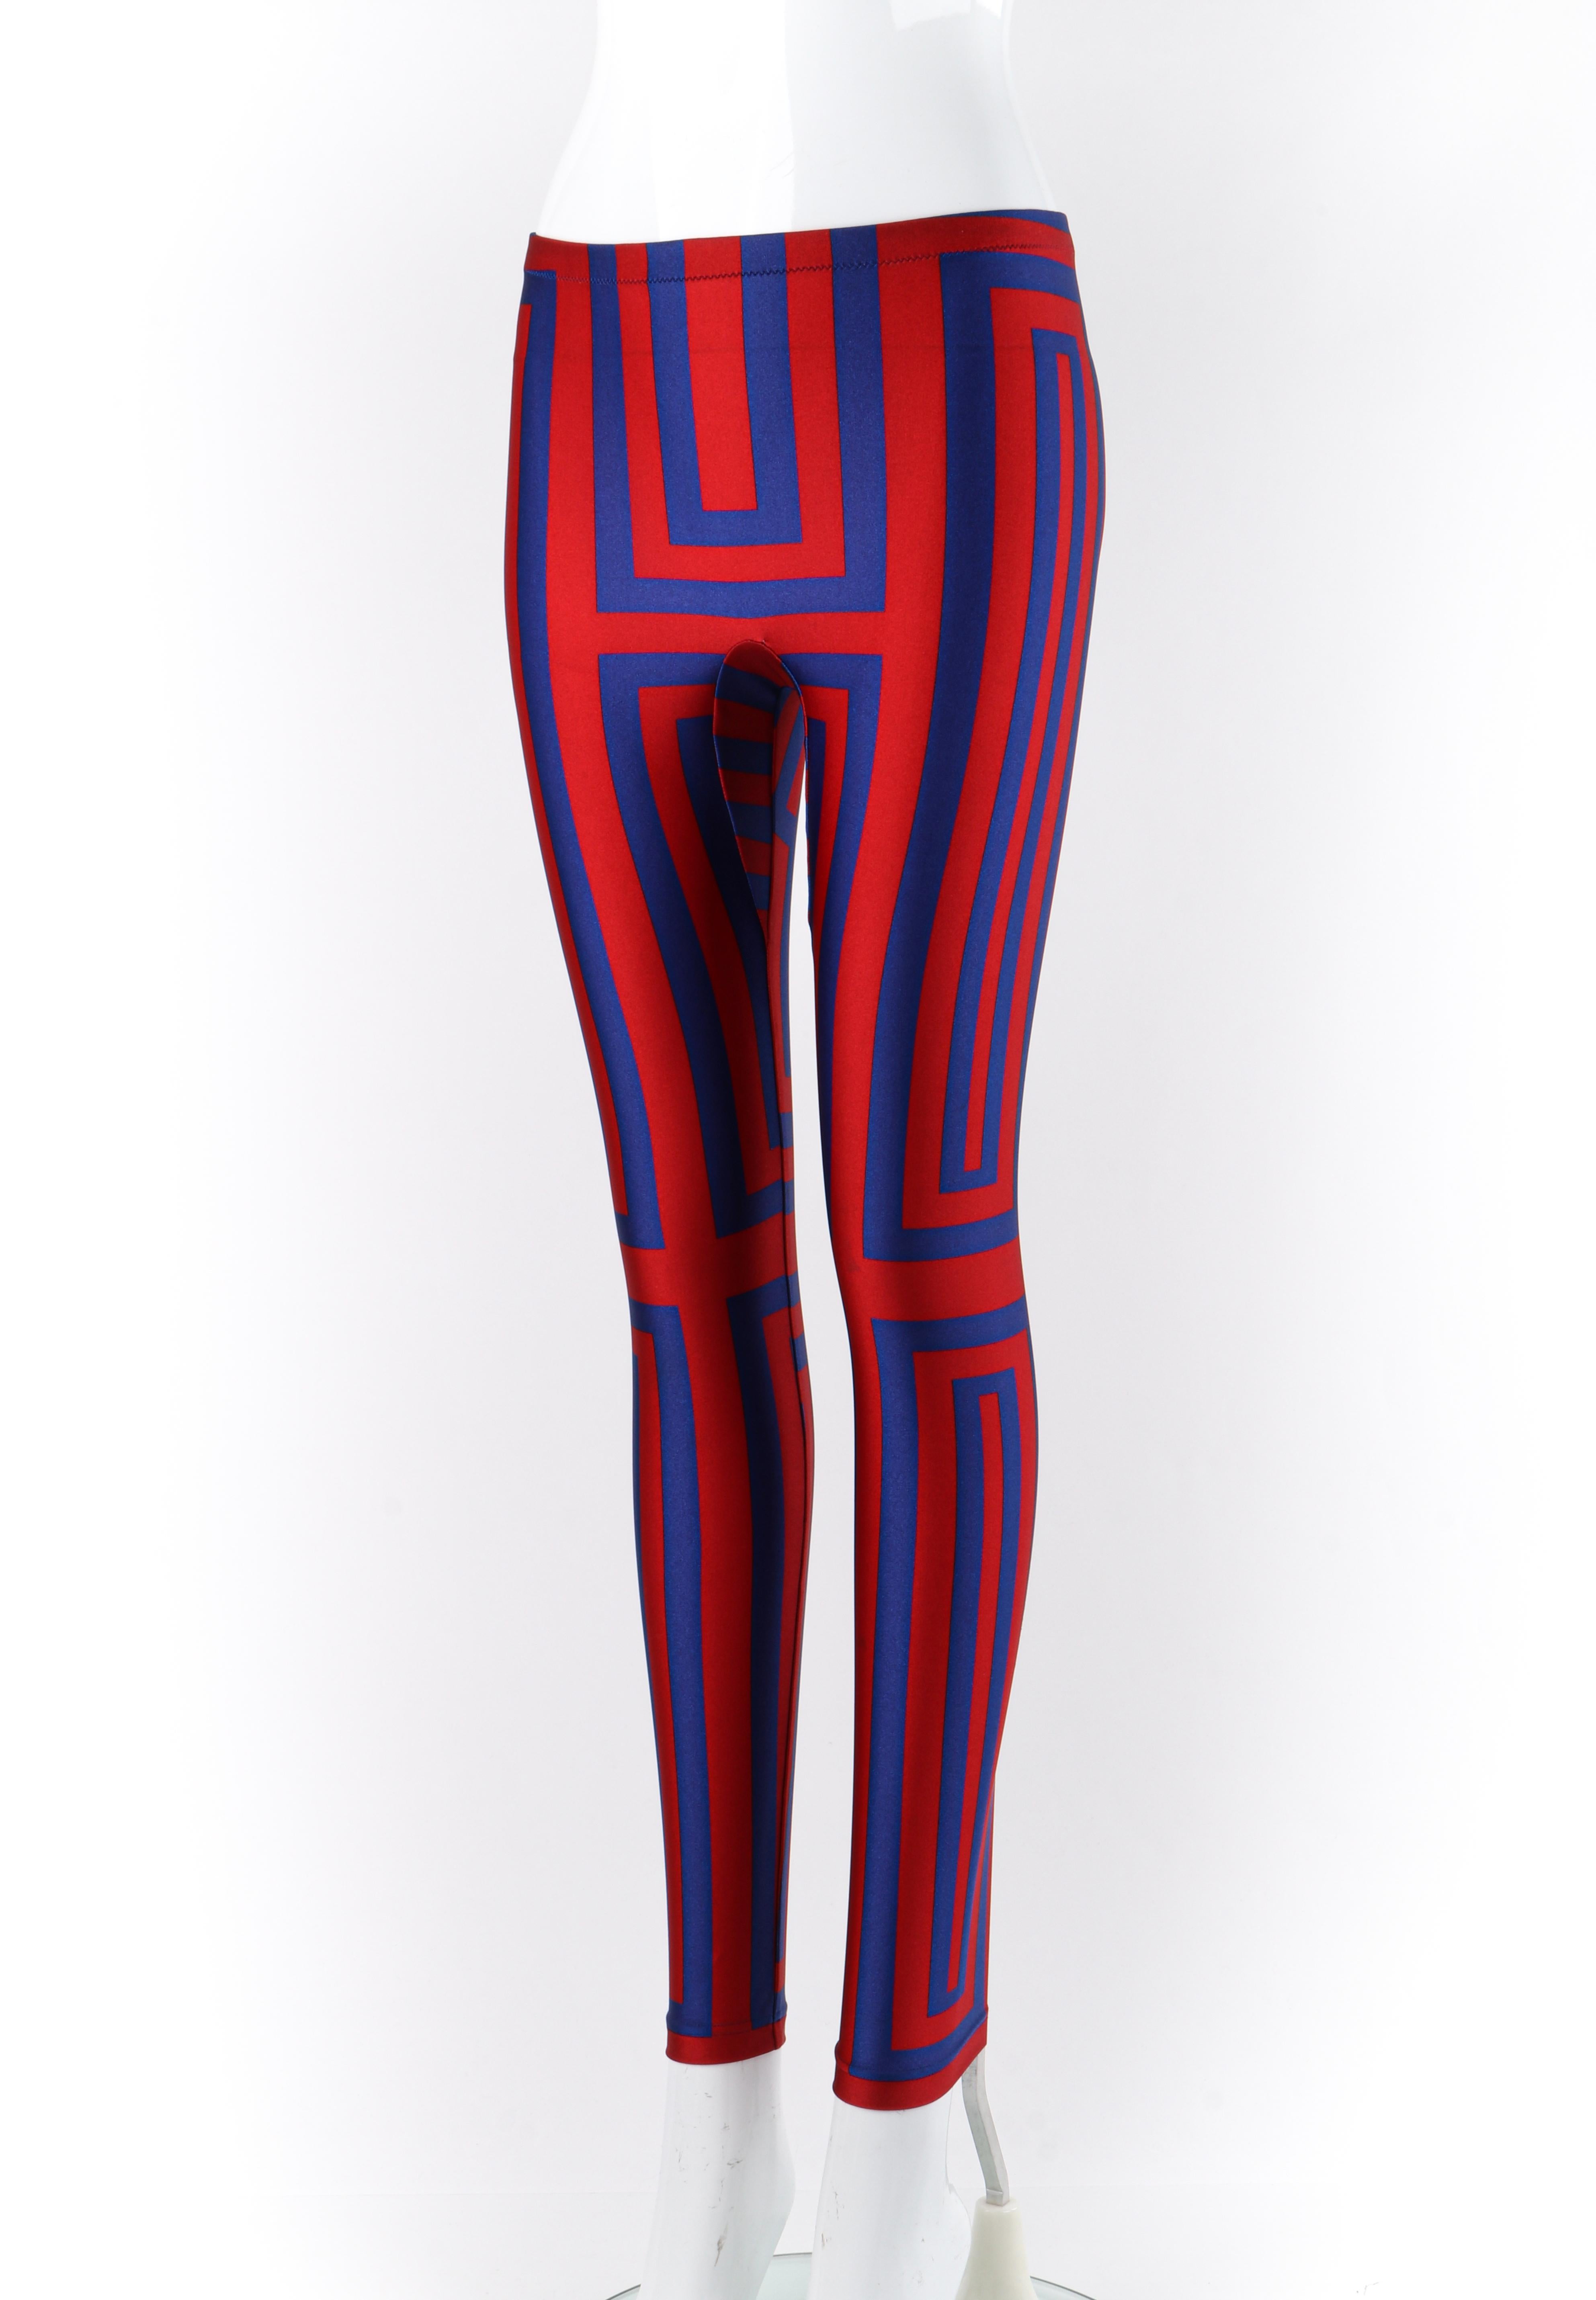 ALEXANDER McQUEEN Resort 2010 Royal Blue & Red Geometric Stripe Legging Pants In Good Condition For Sale In Thiensville, WI